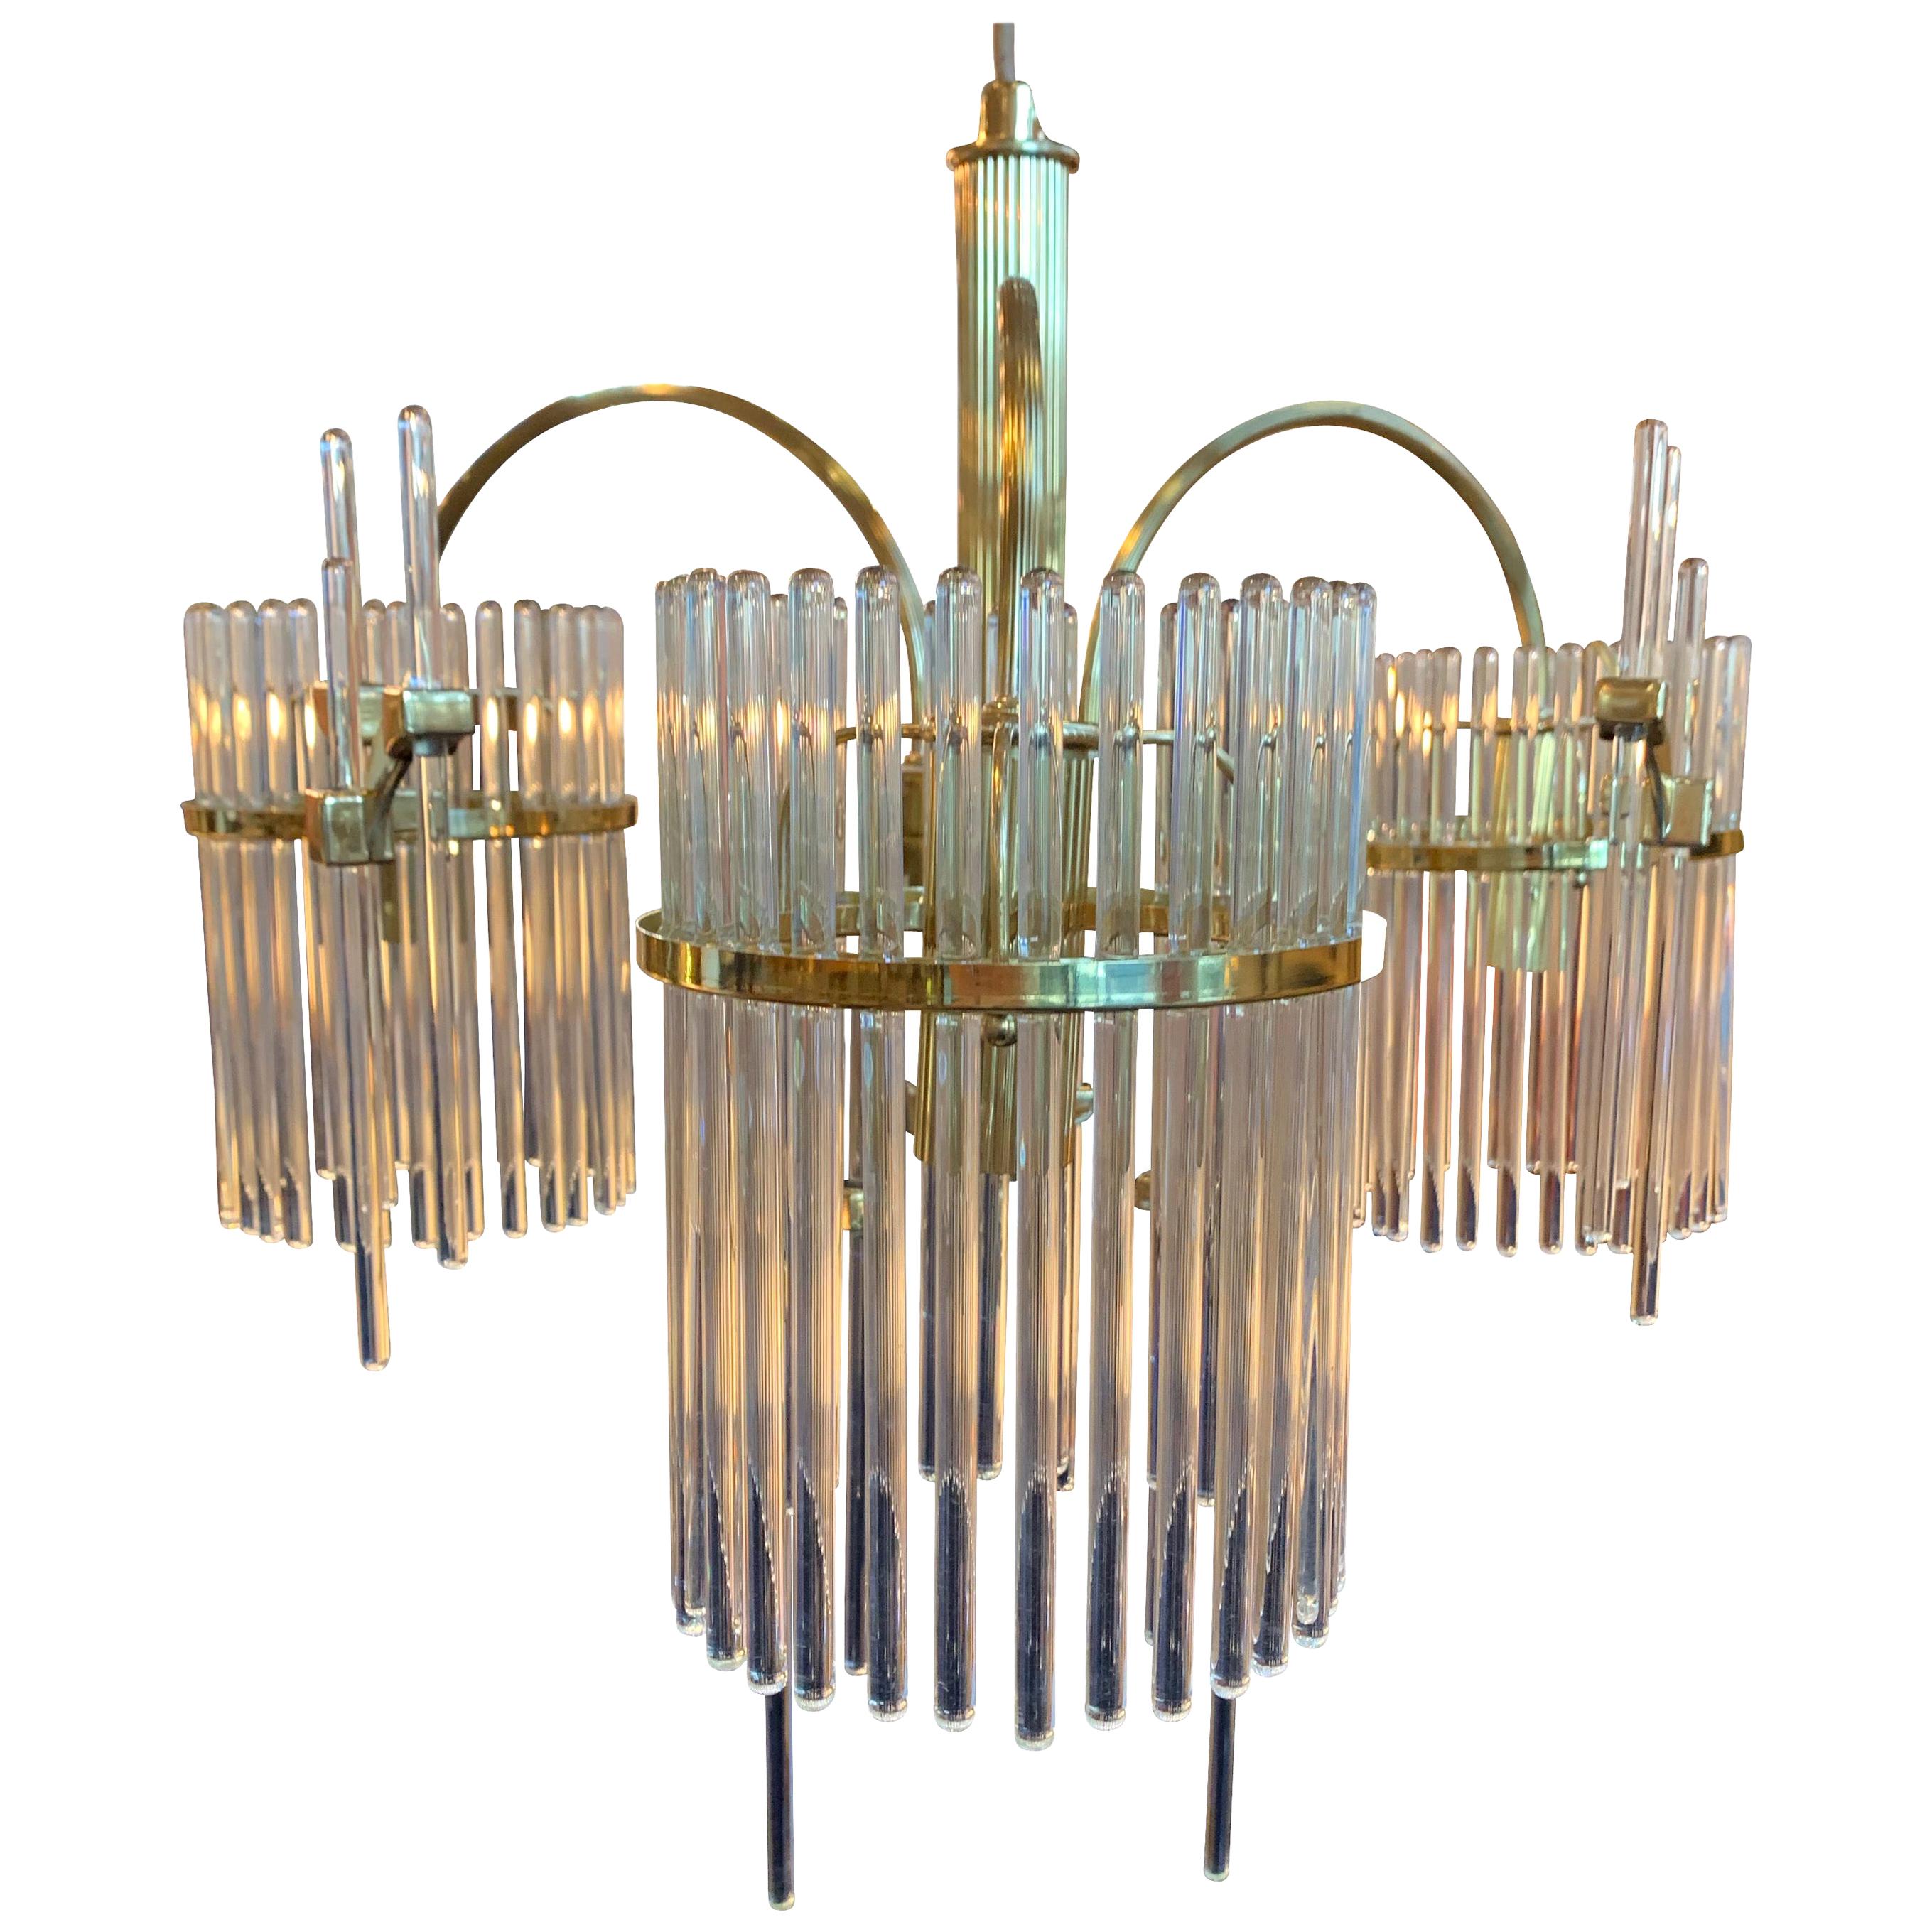 Crystal Rods and Brass Trim Three-Arm Chandelier, Sciolari Design, Italy, 1970s For Sale